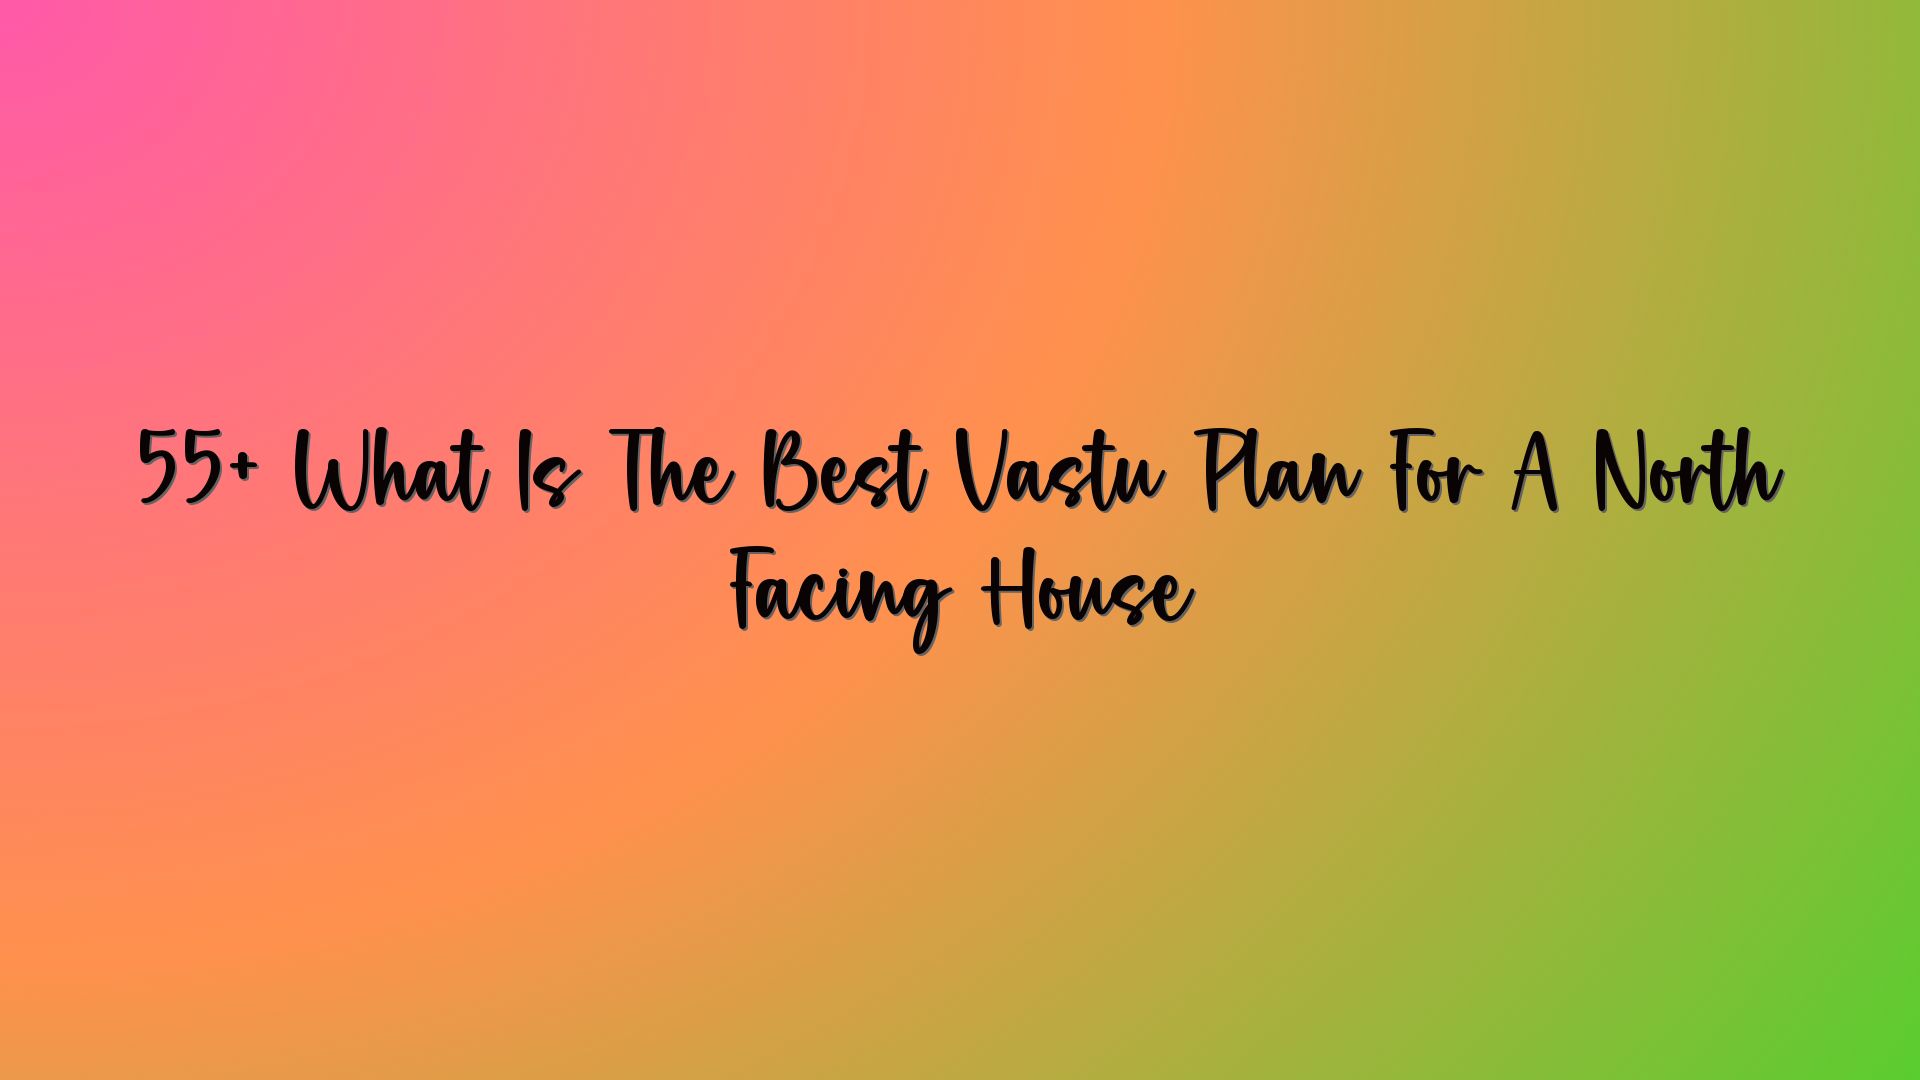 55+ What Is The Best Vastu Plan For A North Facing House